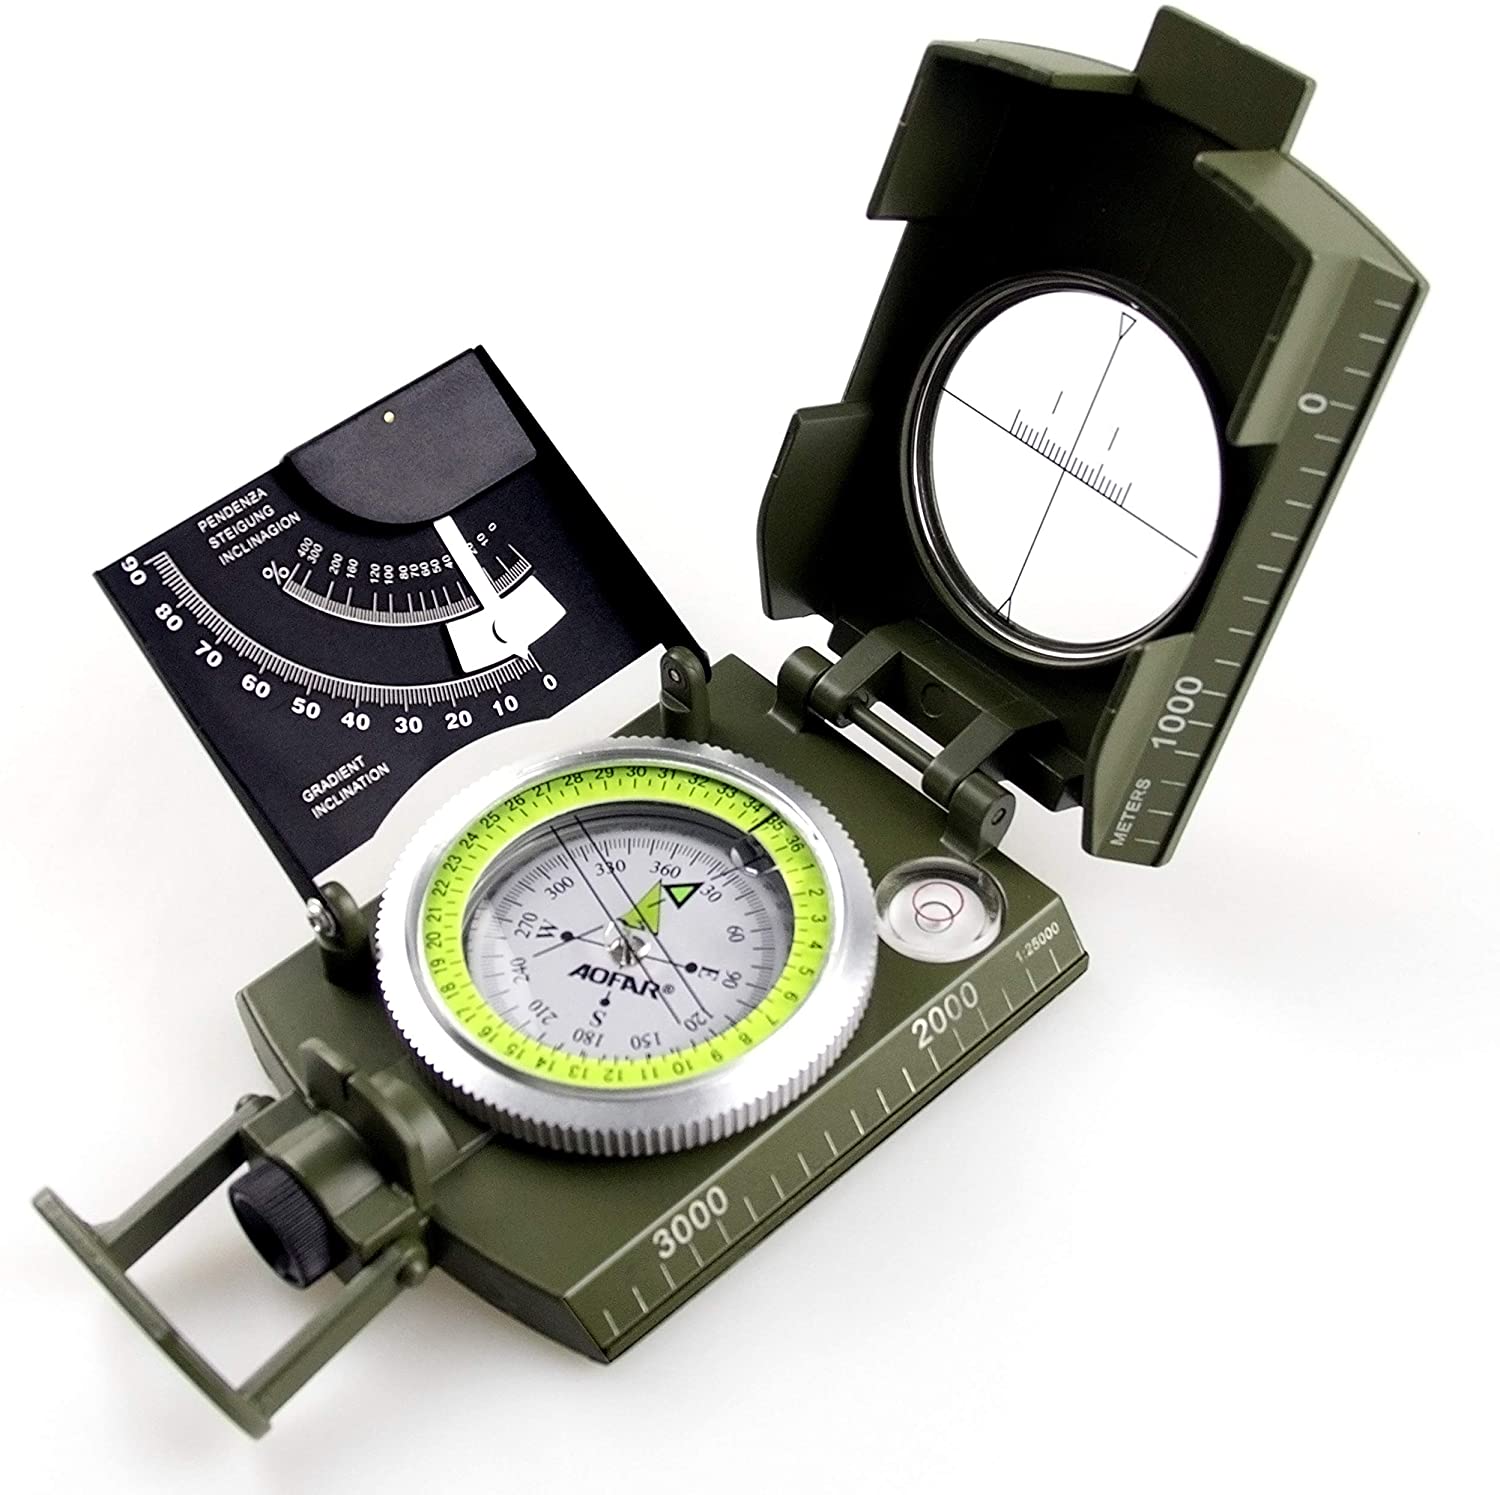 Professional Waterproof Pockets Compass for Military Army Sighting Inclinometer!